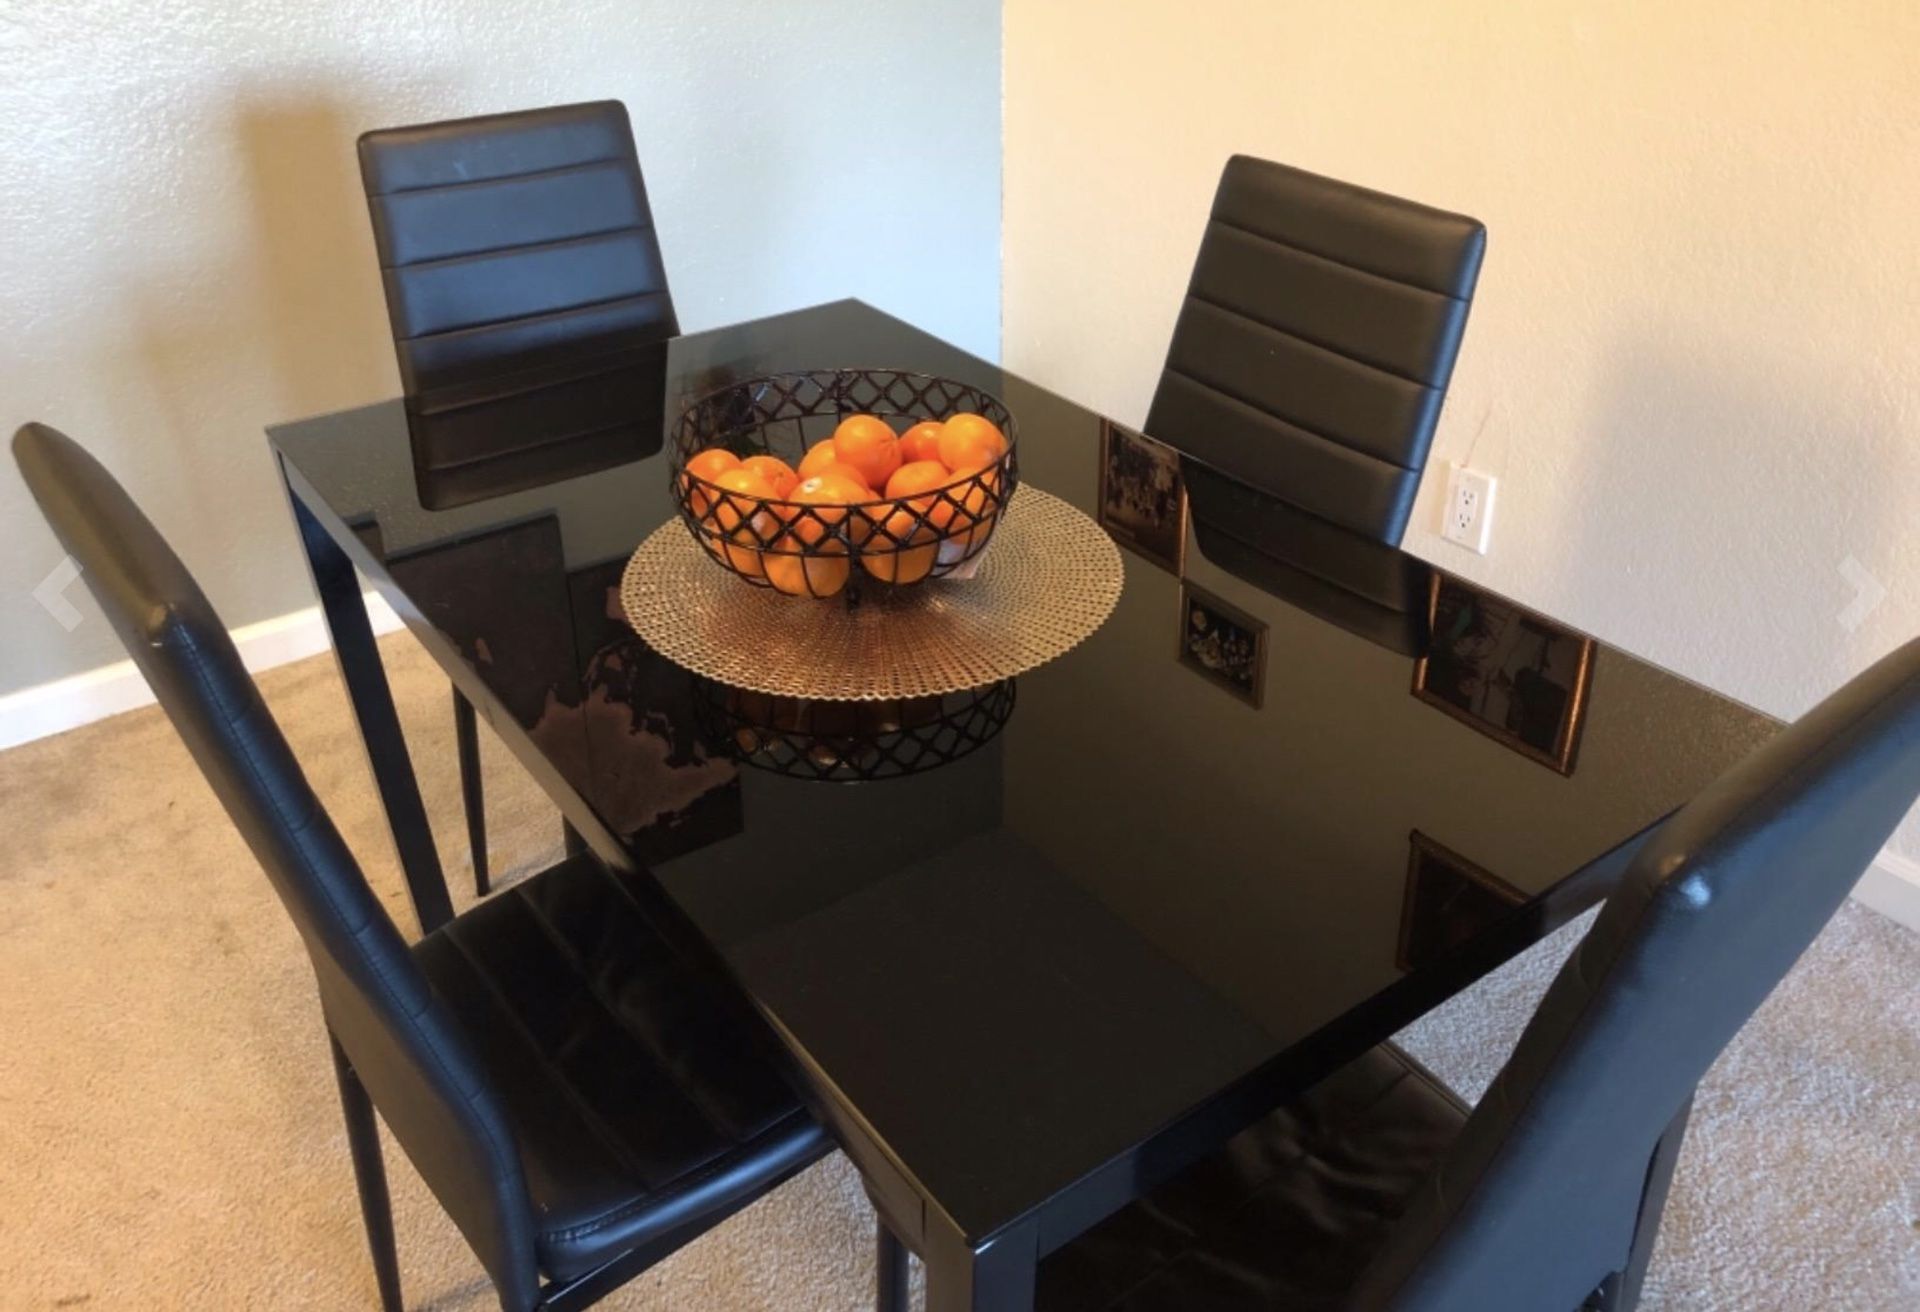 5 Piece Kitchen Table Set with Glass Table Top + 4 Leather Chairs + FREE 4 PLACEMATS